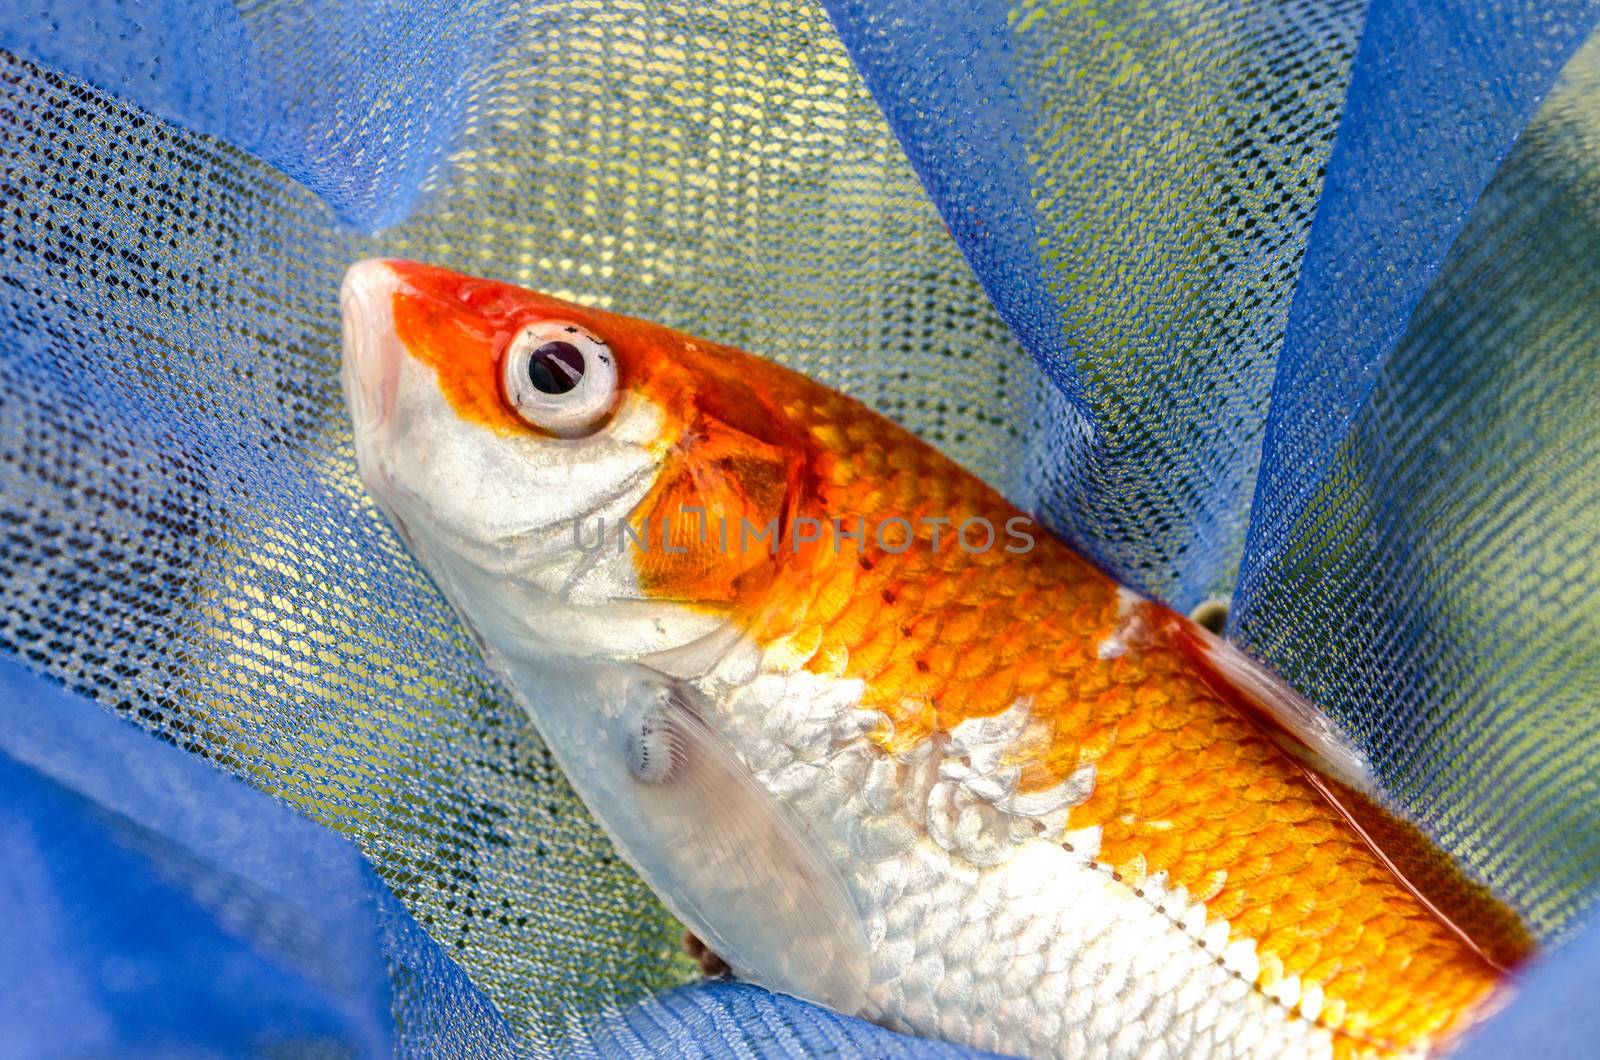 Koi carp caught in a fisherman's net by 9george